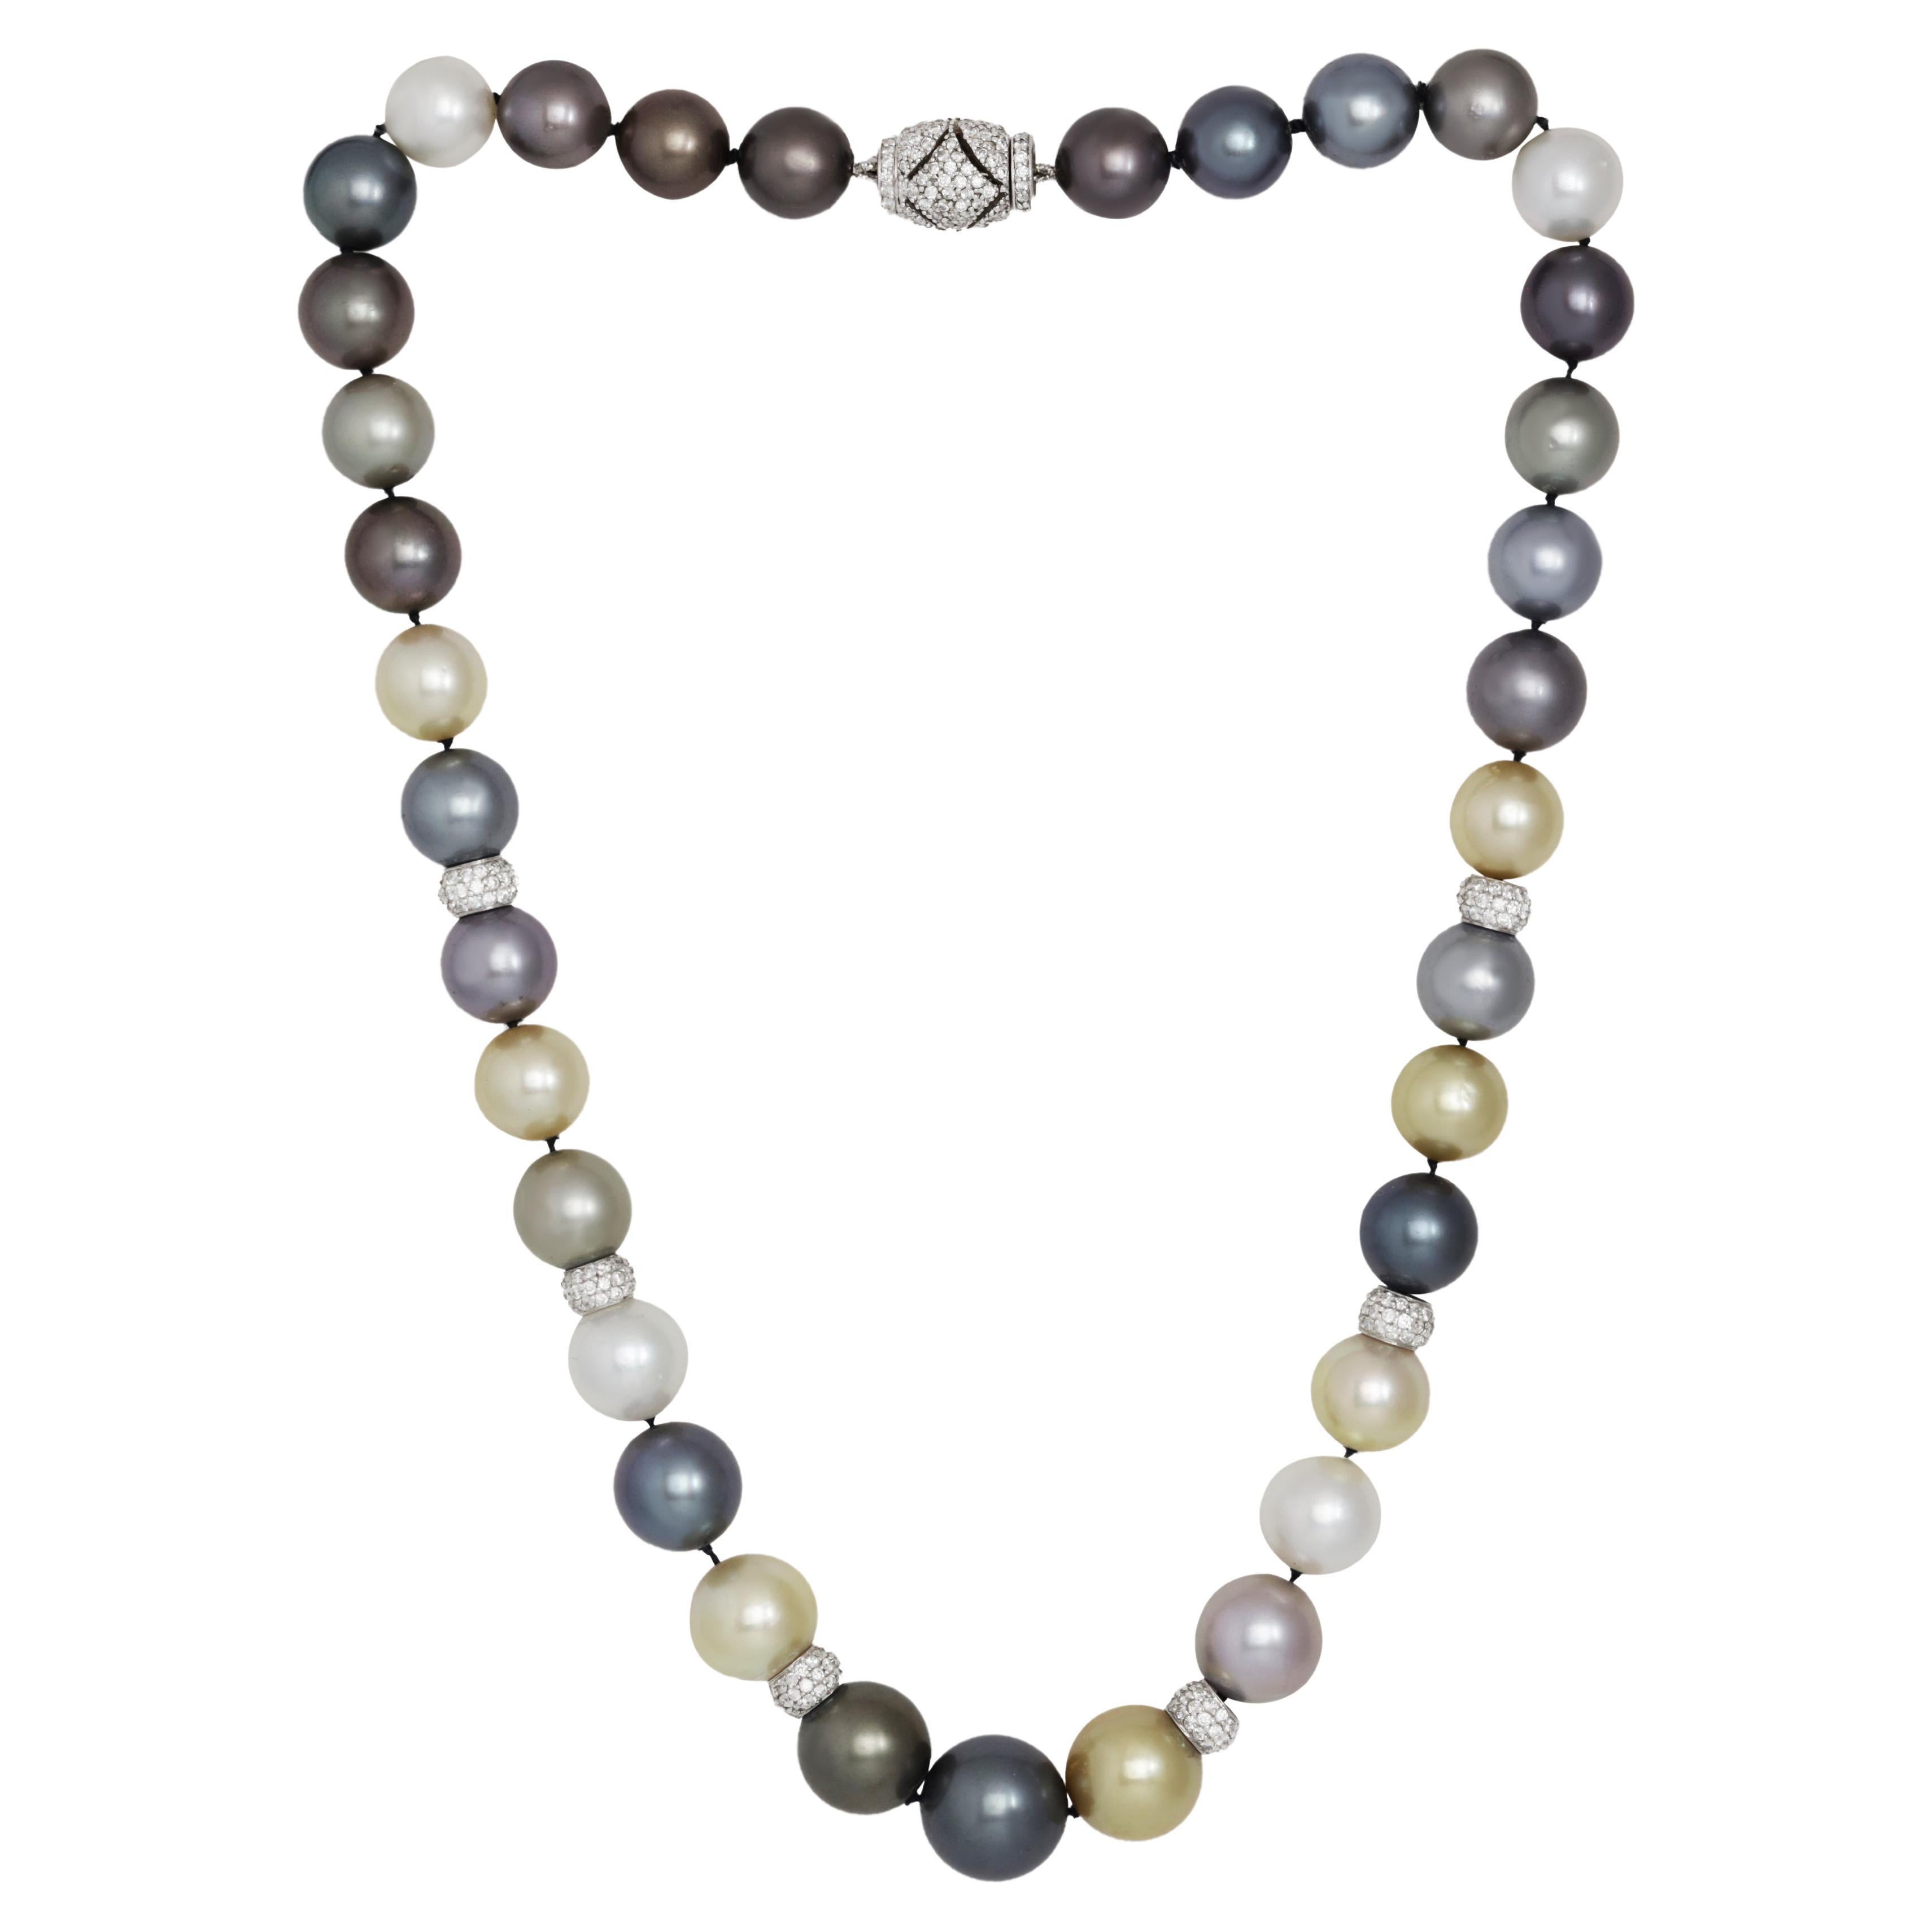 Diana M. Diamond pearl necklace adorned with 10-14 mm Tahitian south sea pearls 